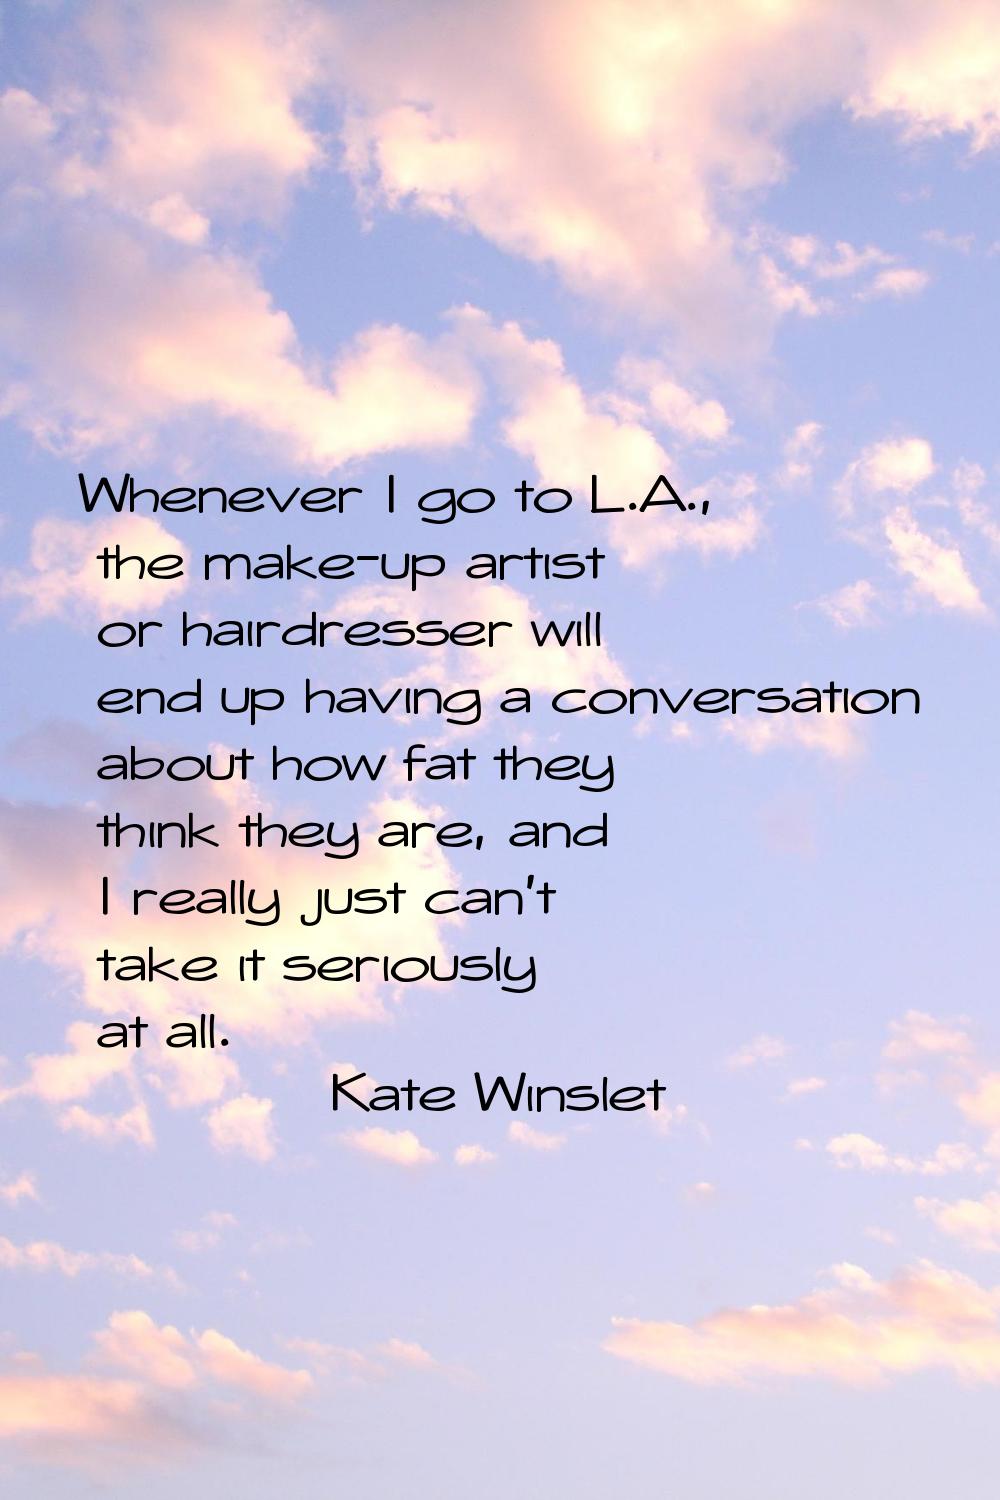 Whenever I go to L.A., the make-up artist or hairdresser will end up having a conversation about ho